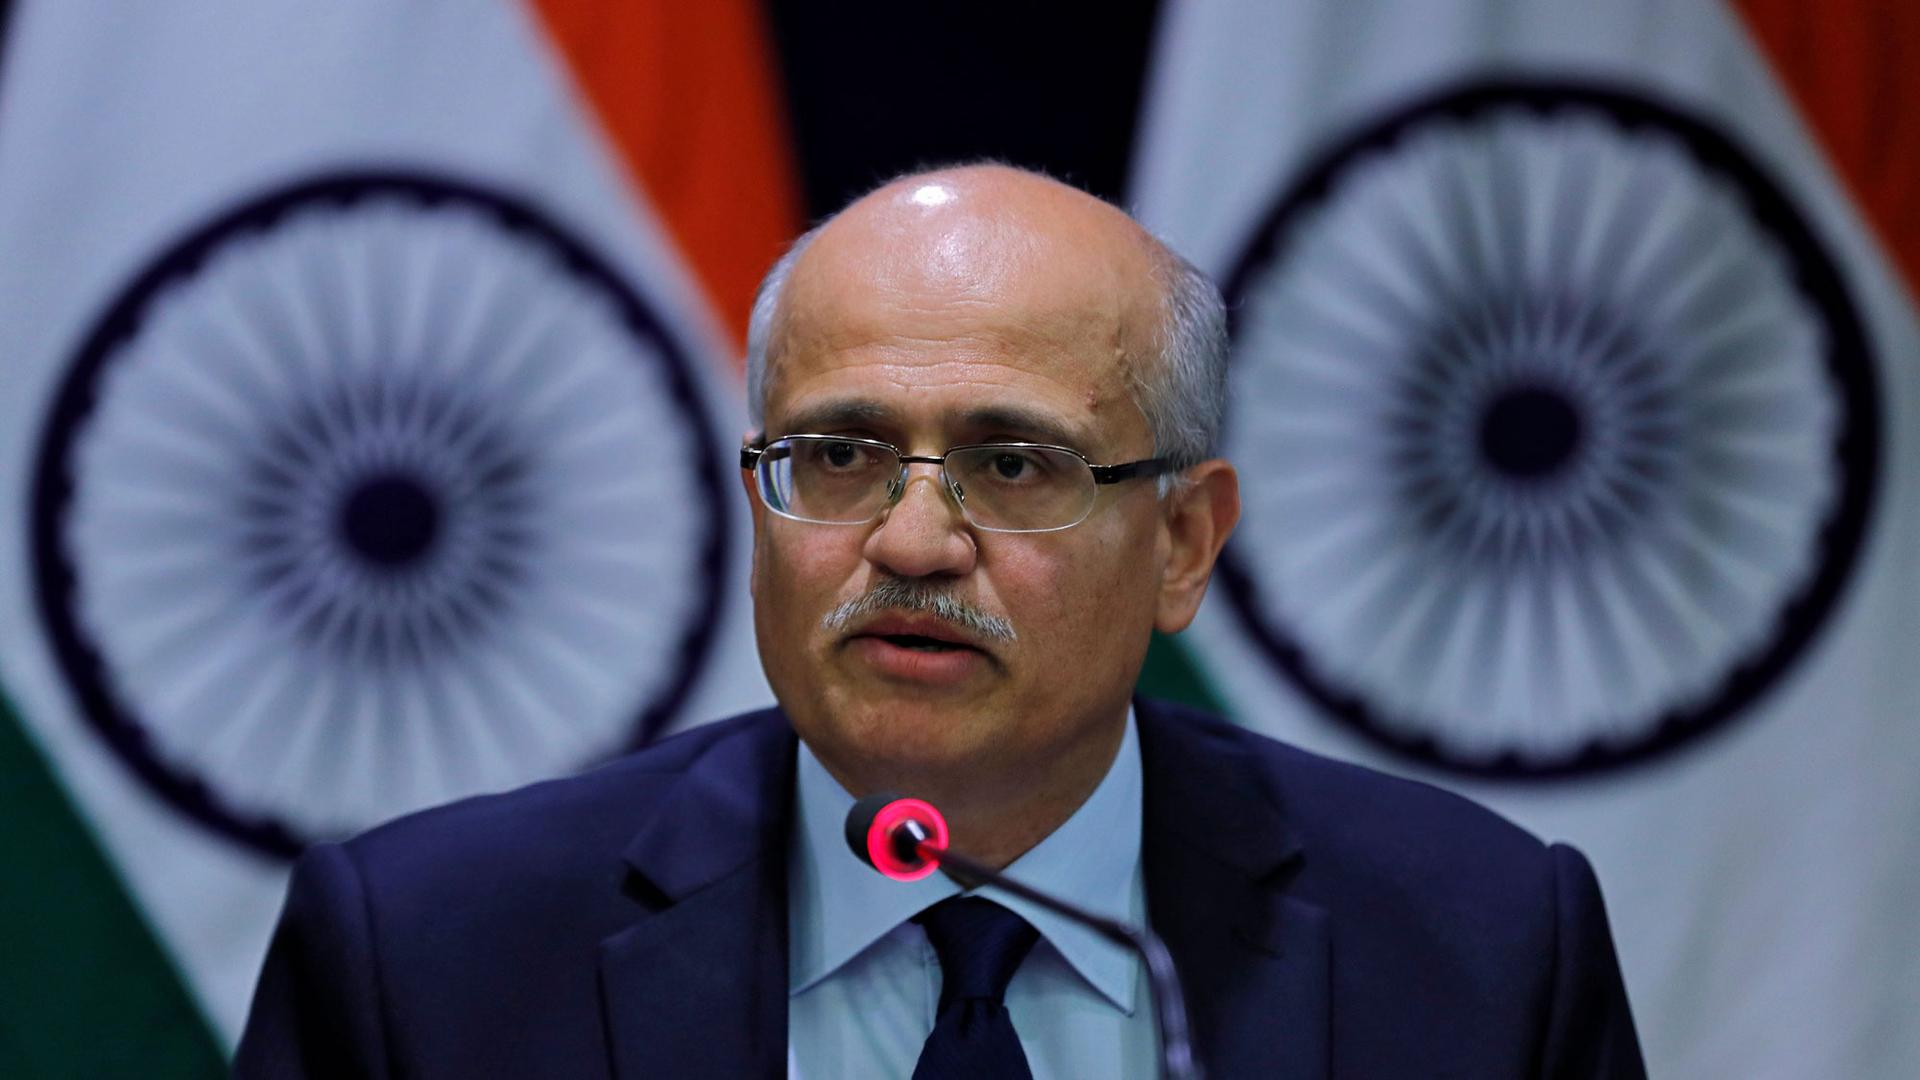 India's Foreign Secretary Vijay Gokhale is shown wearing a blue suit and speaking into a microphone with Indian flags behind him.